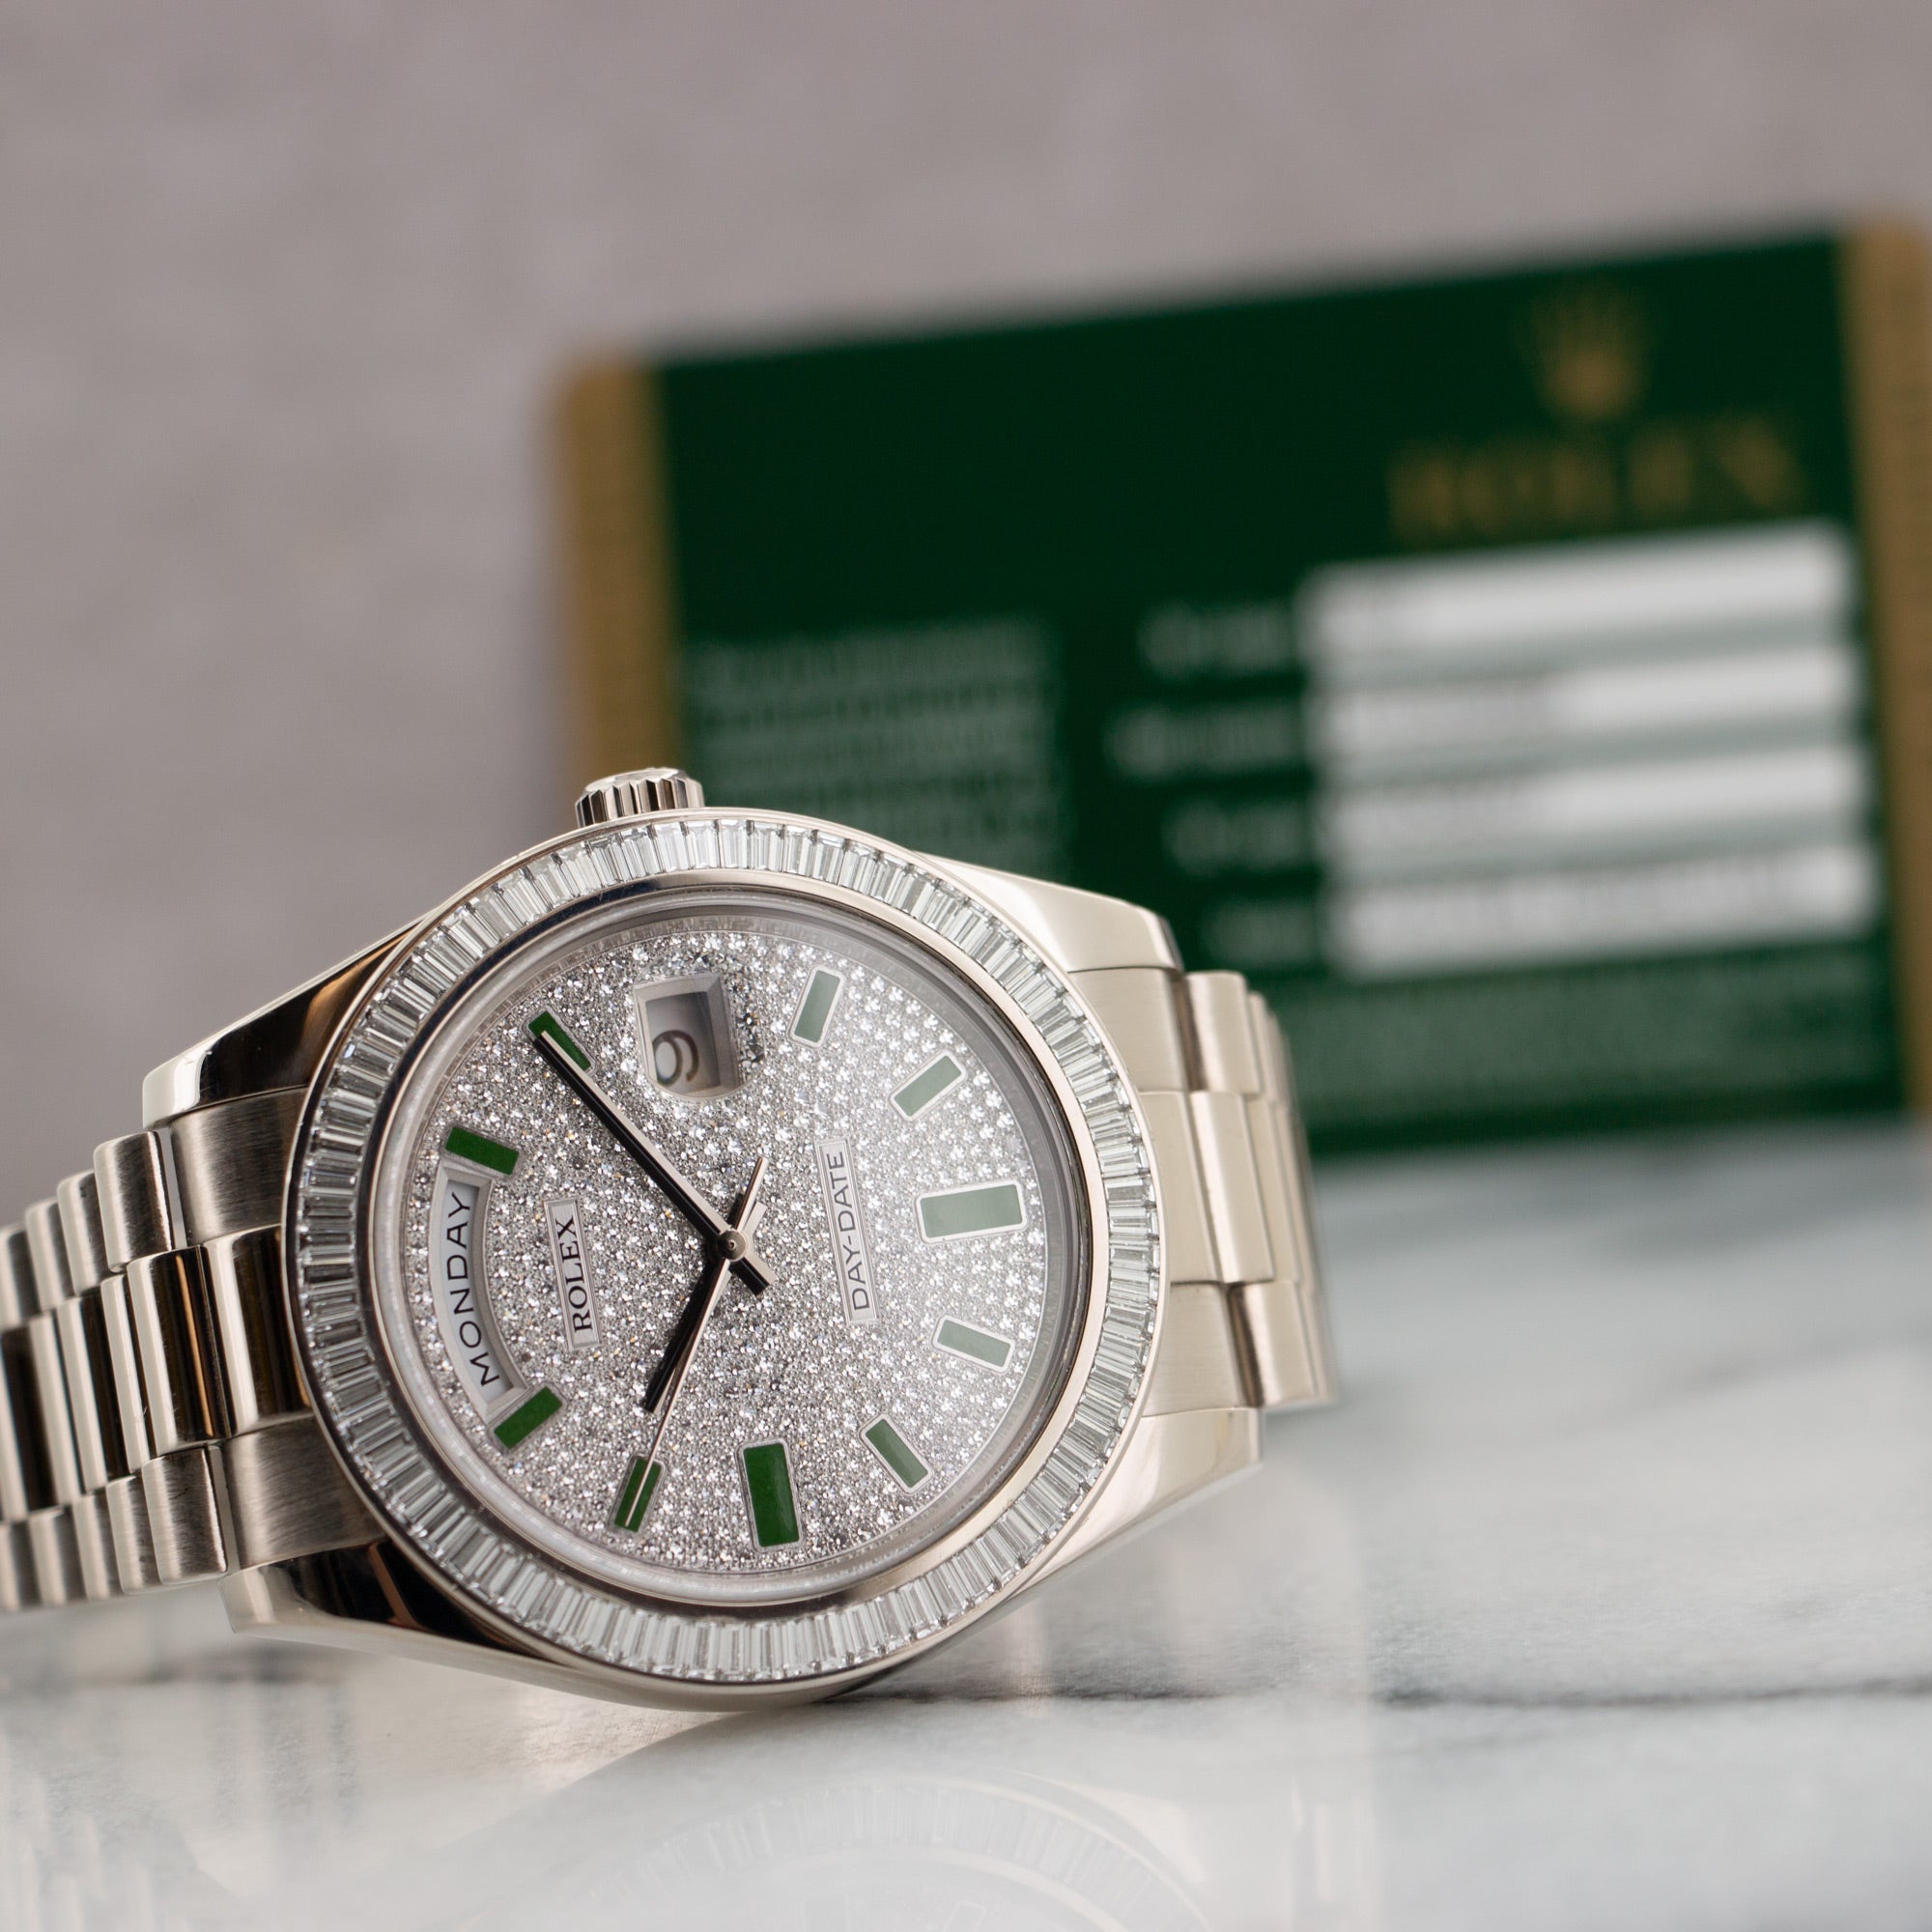 Rolex - Rolex Day-Date White Gold with Baguette Bezel and Pave Dial Ref. 218399BR - The Keystone Watches